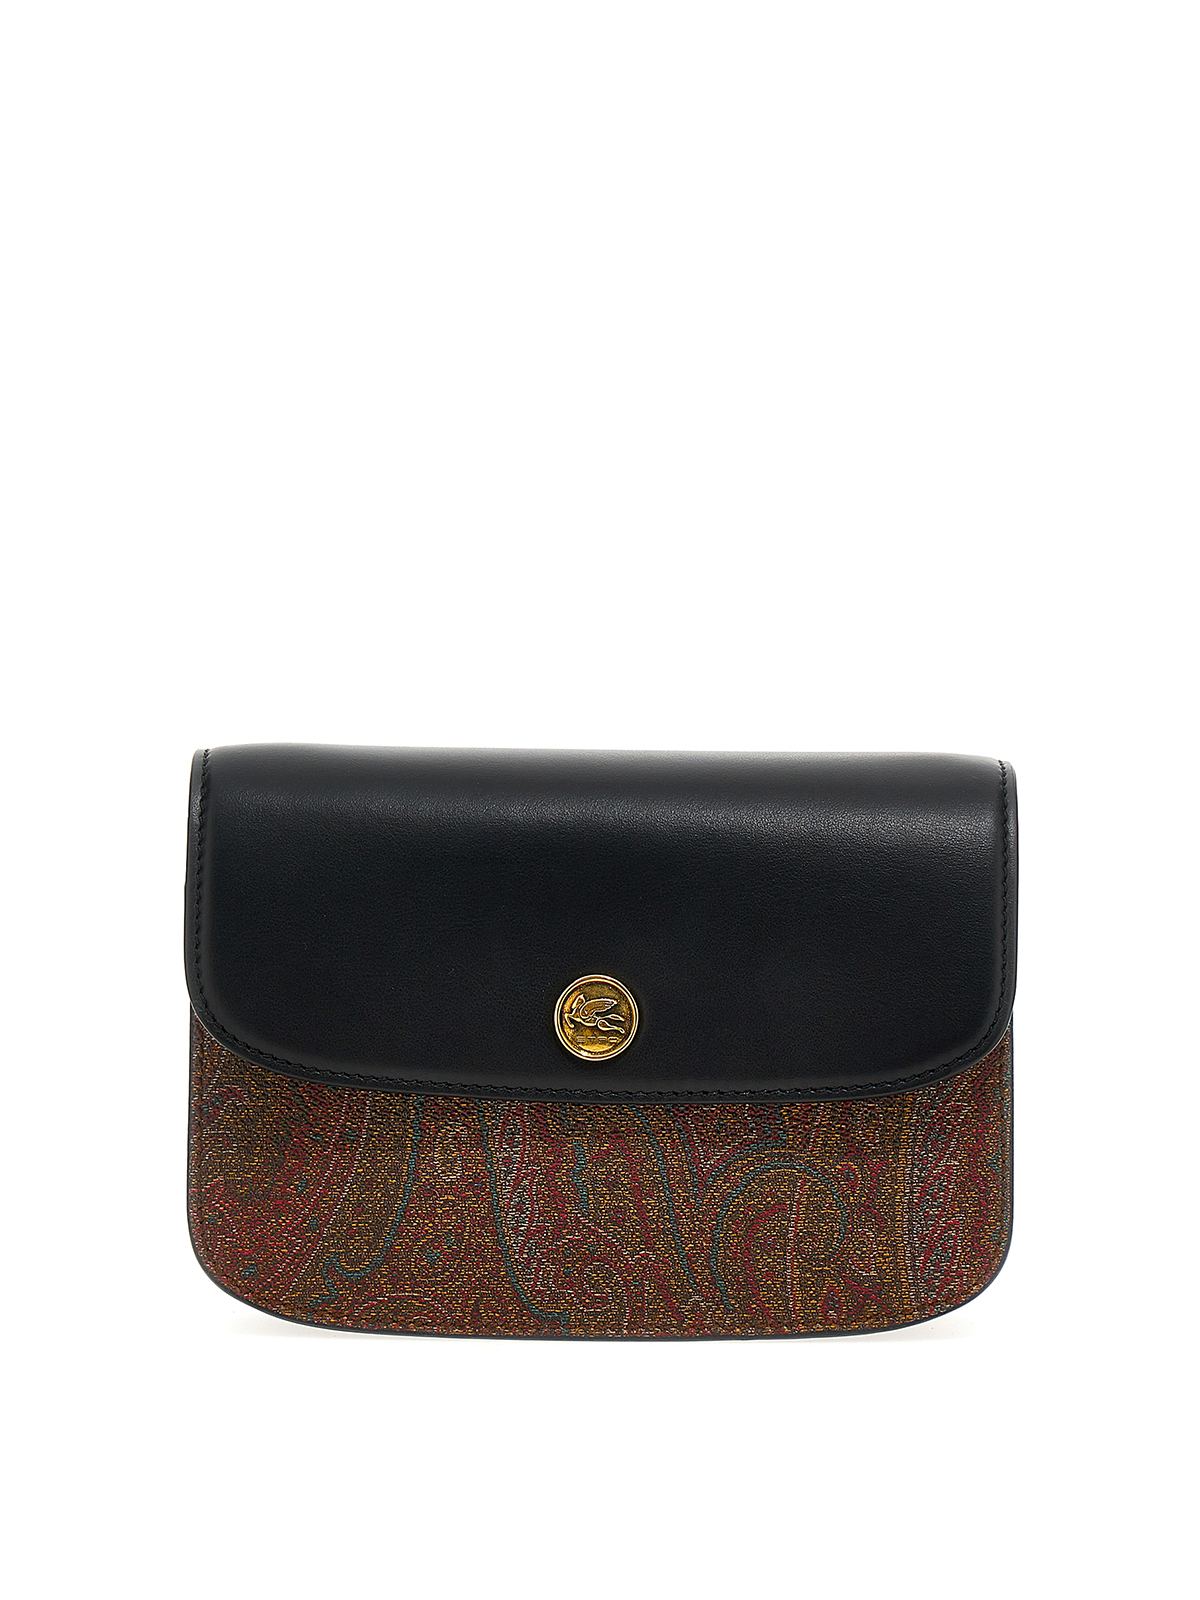 Women's ETRO Bags Sale, Up To 70% Off